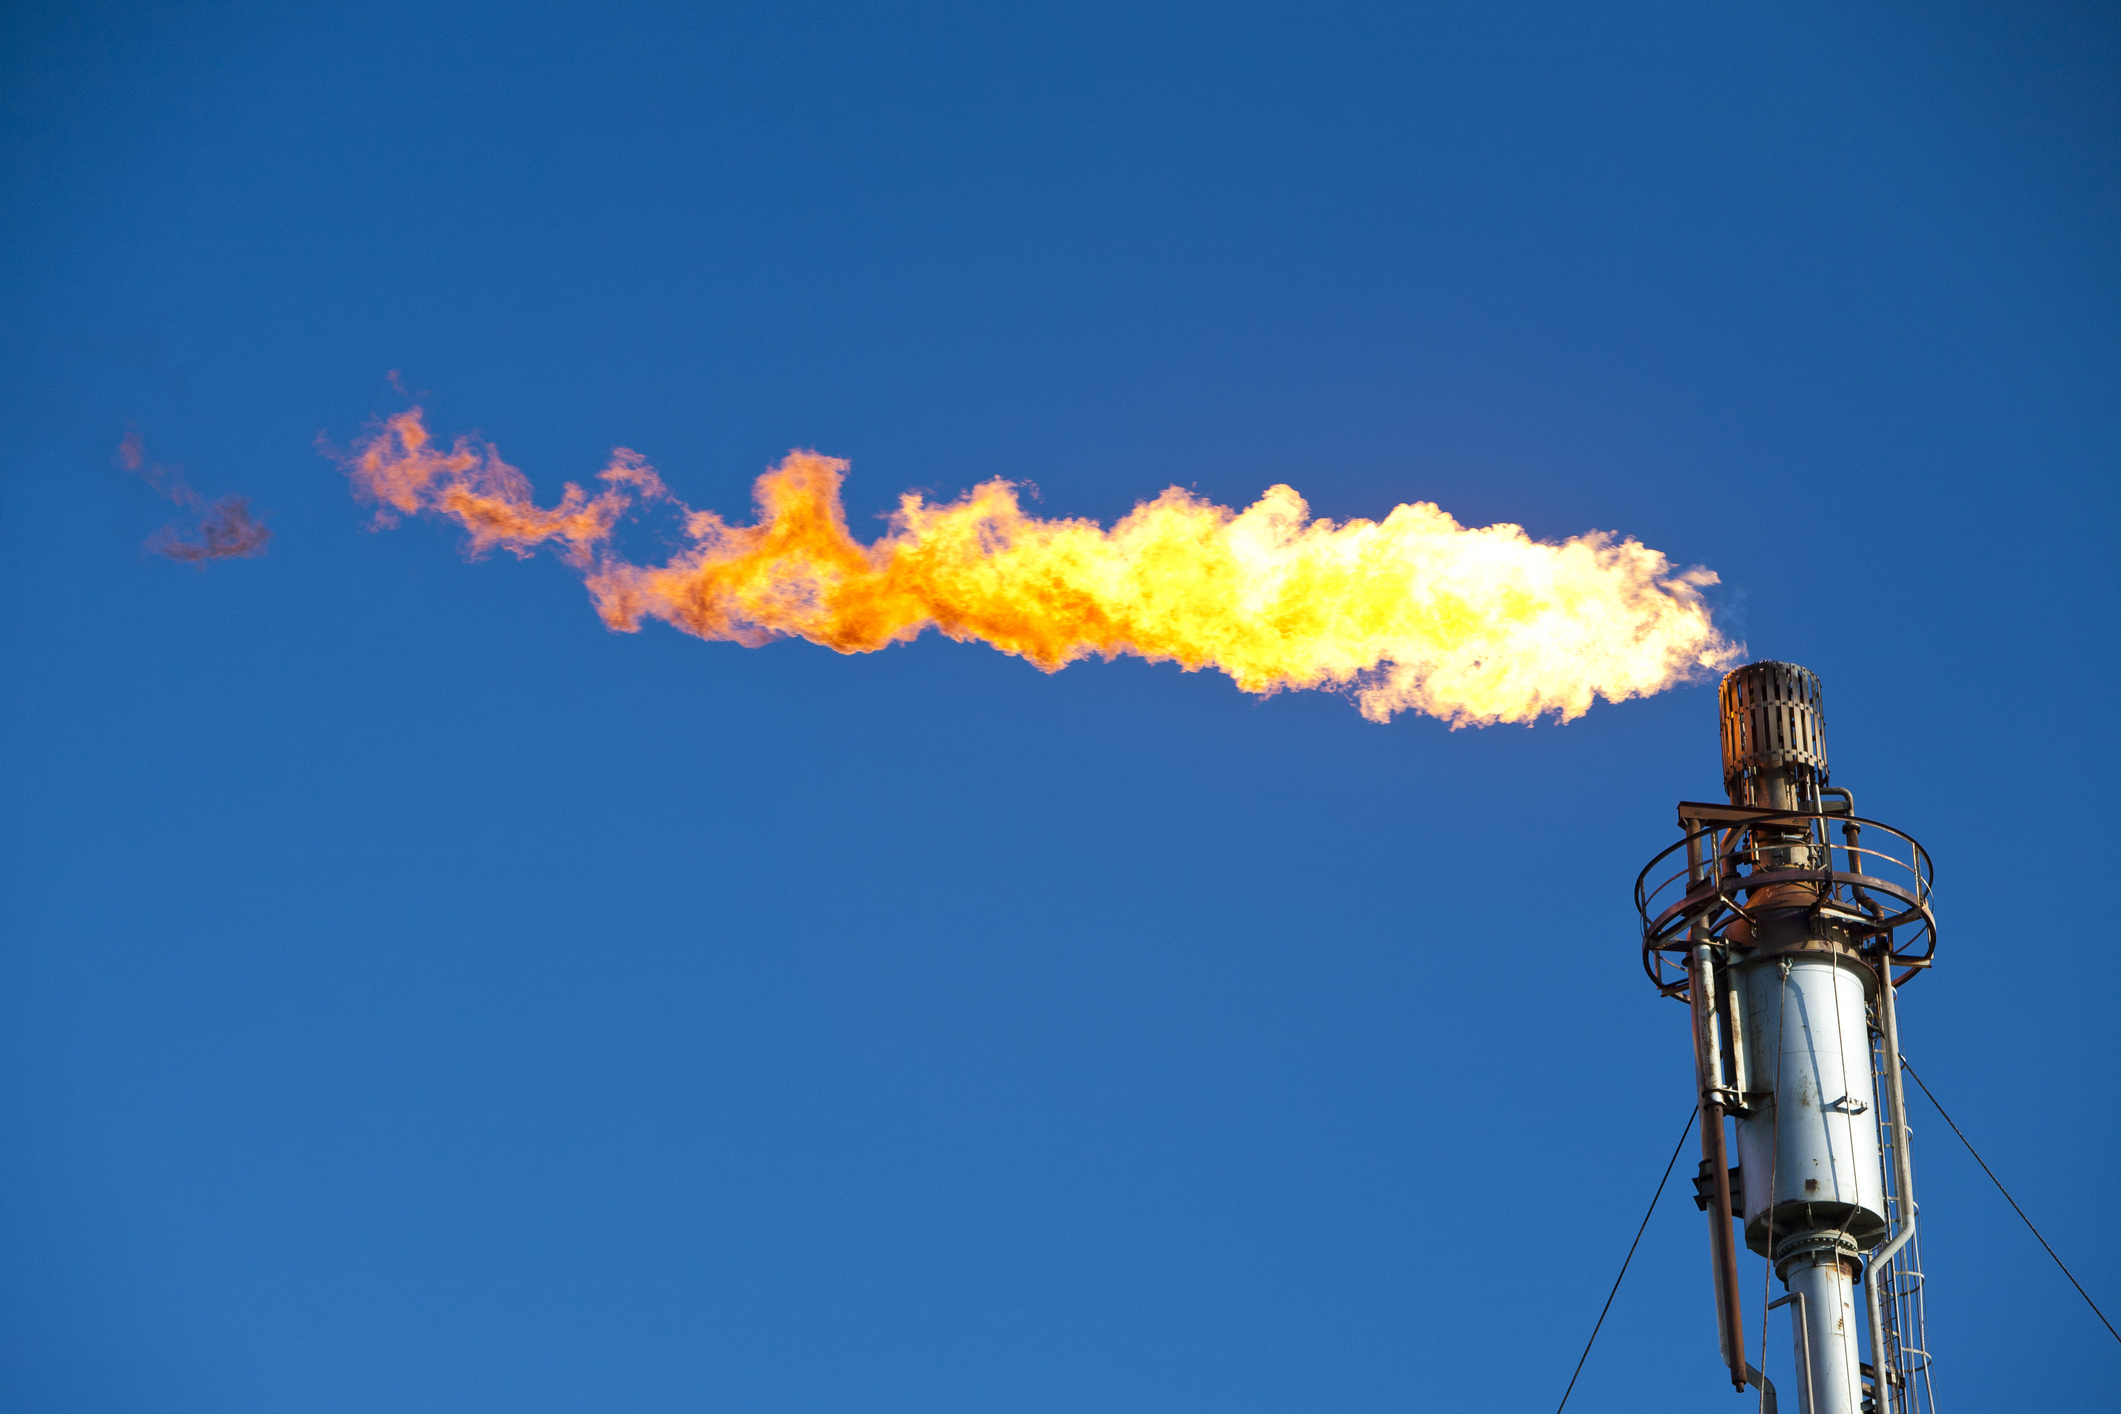 Flaring off gas at the Flotta oil terminal on the Island of Flotta in the Orkney’s Scotland, UK.